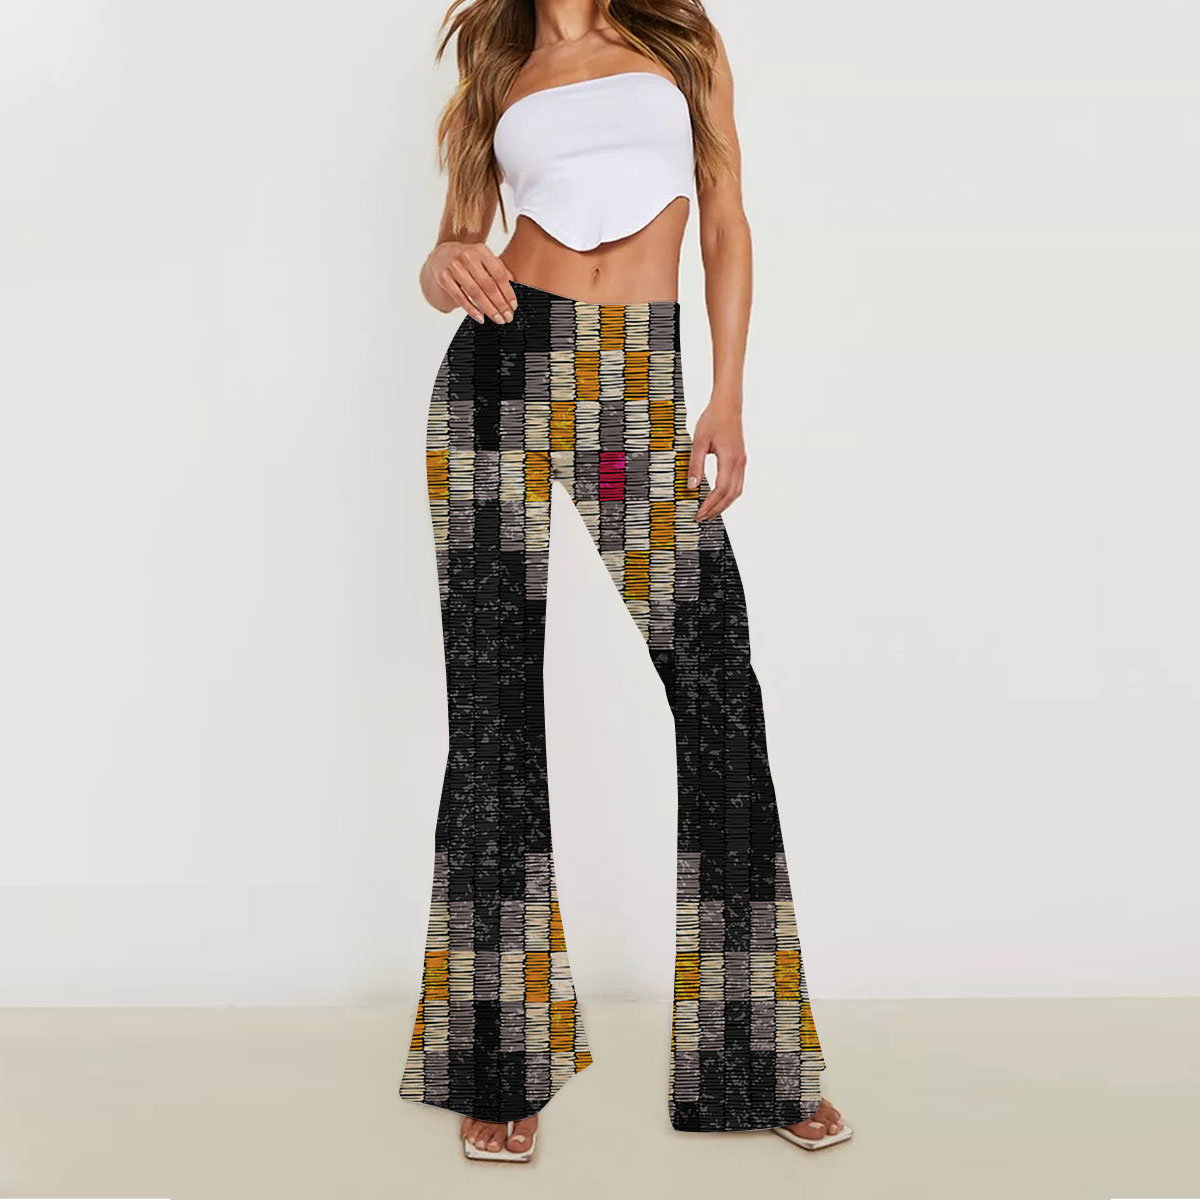 Embroidered Bohemian Style Skinny Flare Pants